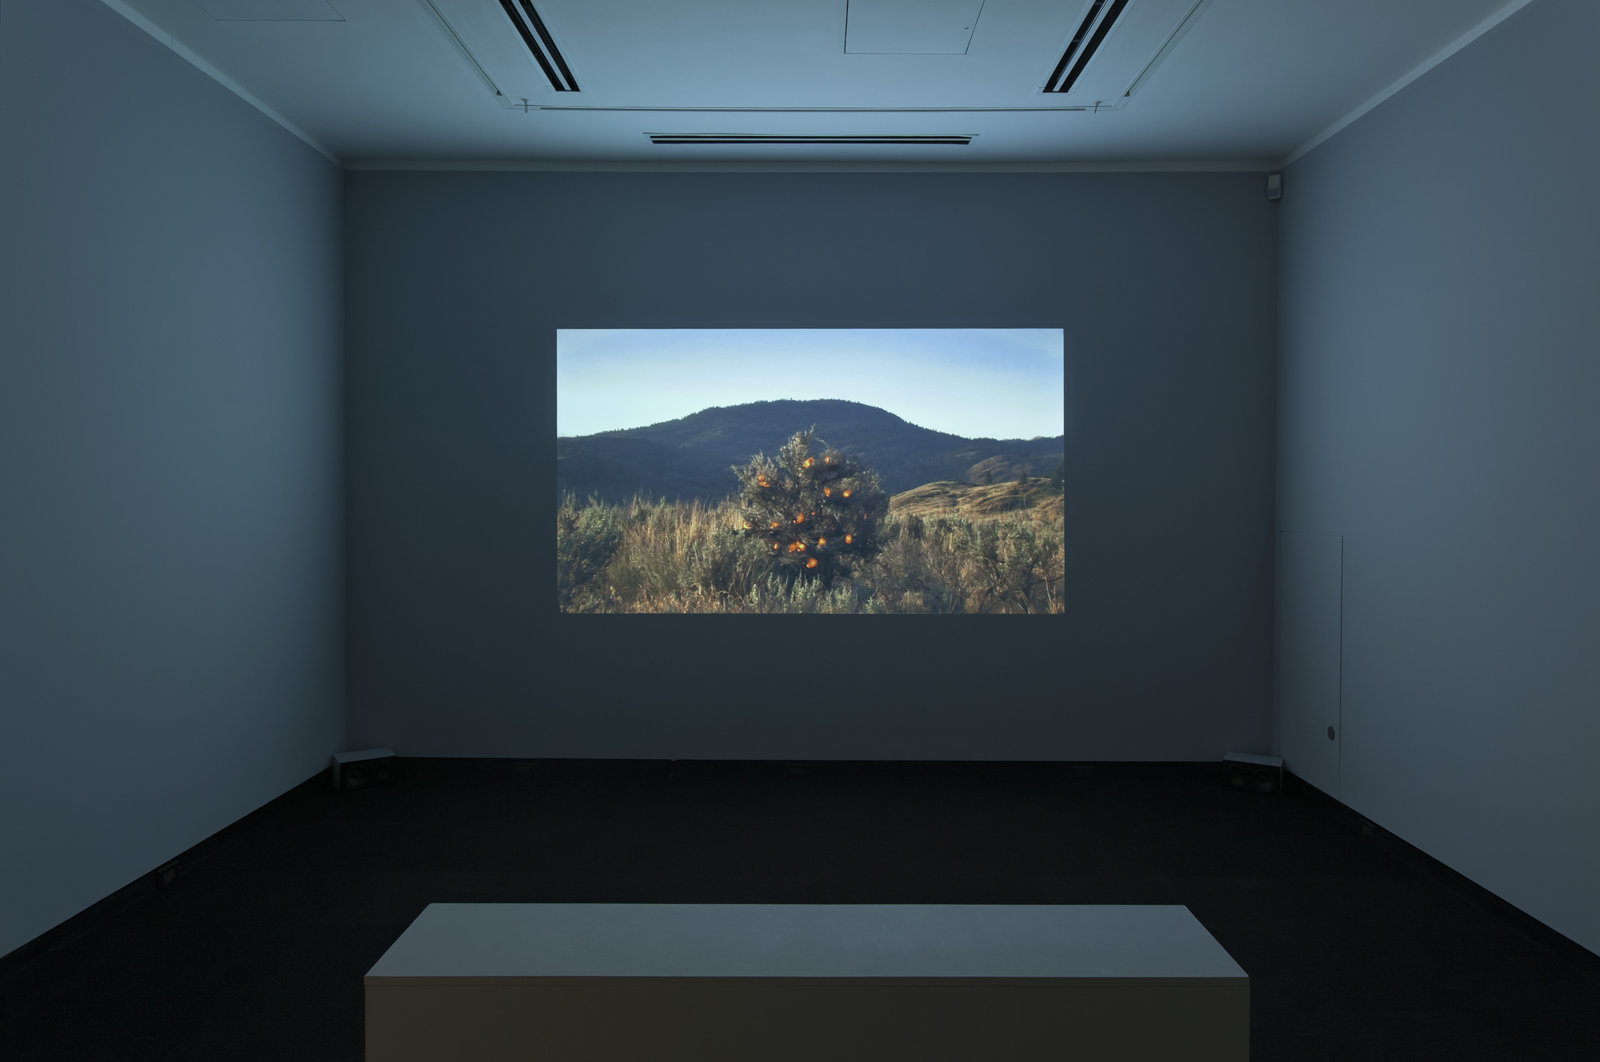 Kevin Schmidt, Burning Bush, 2005, HD video loop, 5 hours, 3 minutes. Installation view, Don't Stop Believing, Justina M. Barnicke Gallery, Toronto, 2011